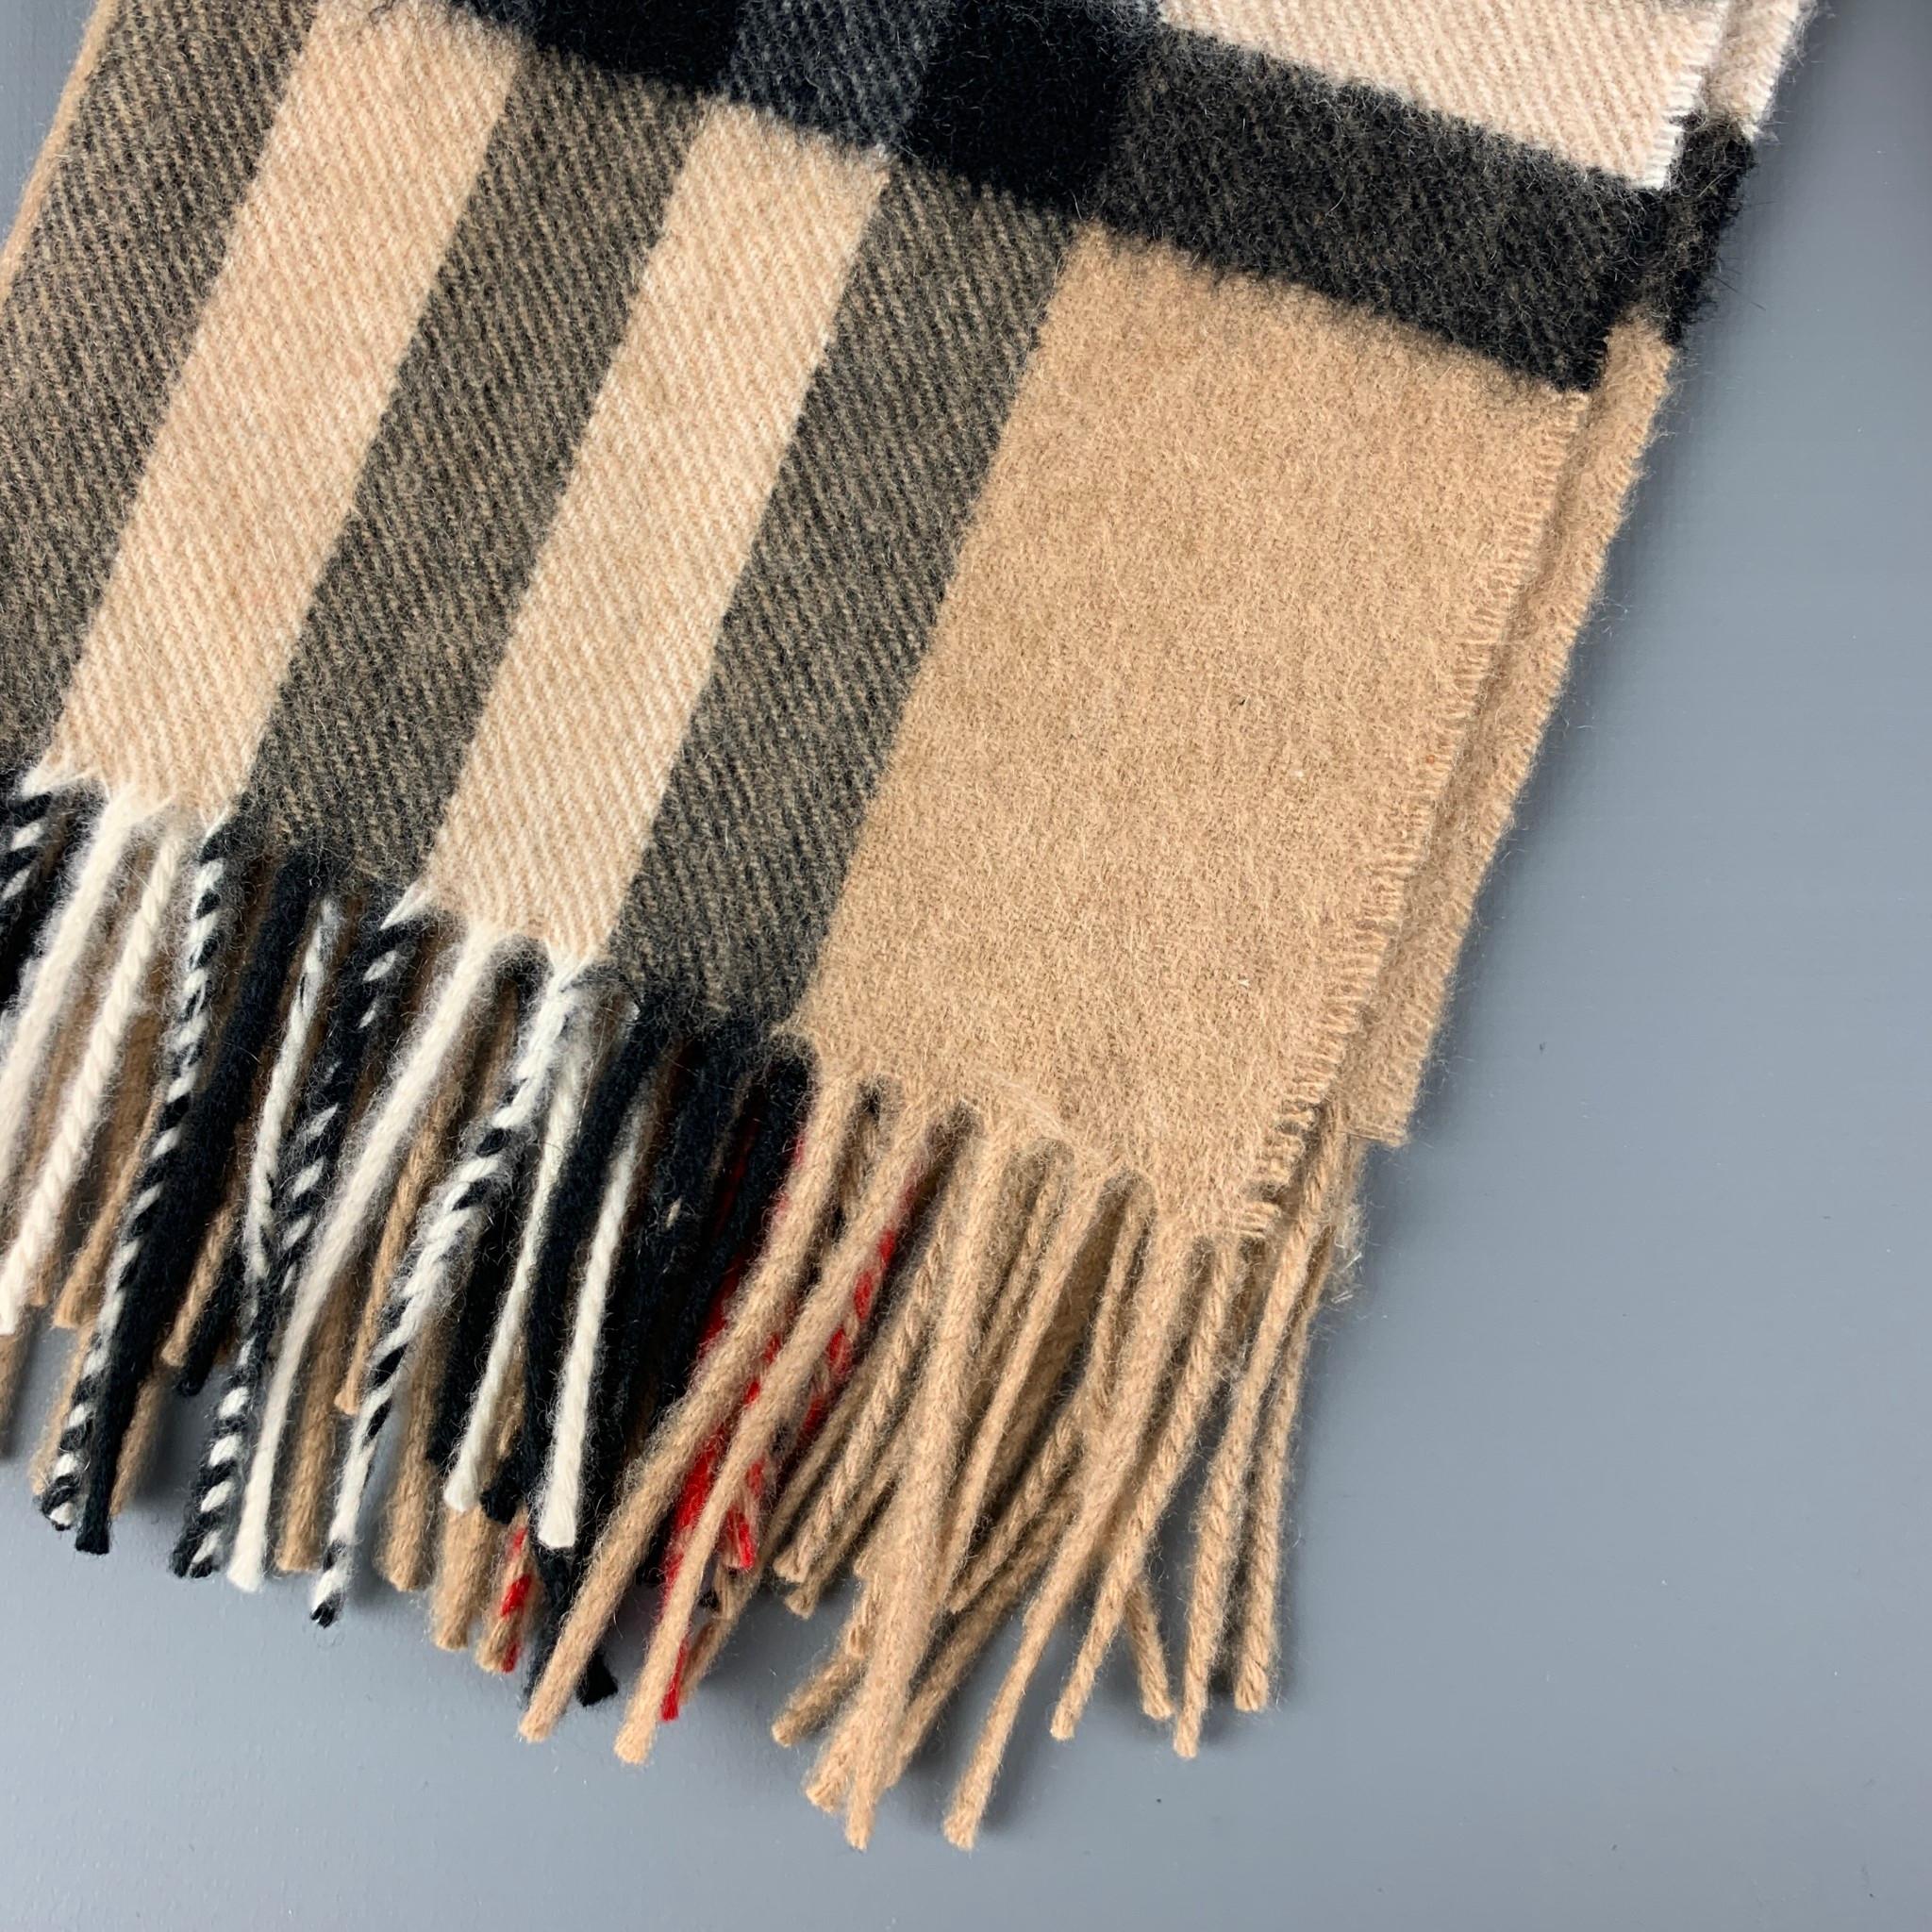 BURBERRY scarf beige & black plaid cashmere with a two and half fringe trim. 

Excellent Pre-Owned Condition.
Original Retail Price: $470.00

Measurements:

68 in. x 12 in. 